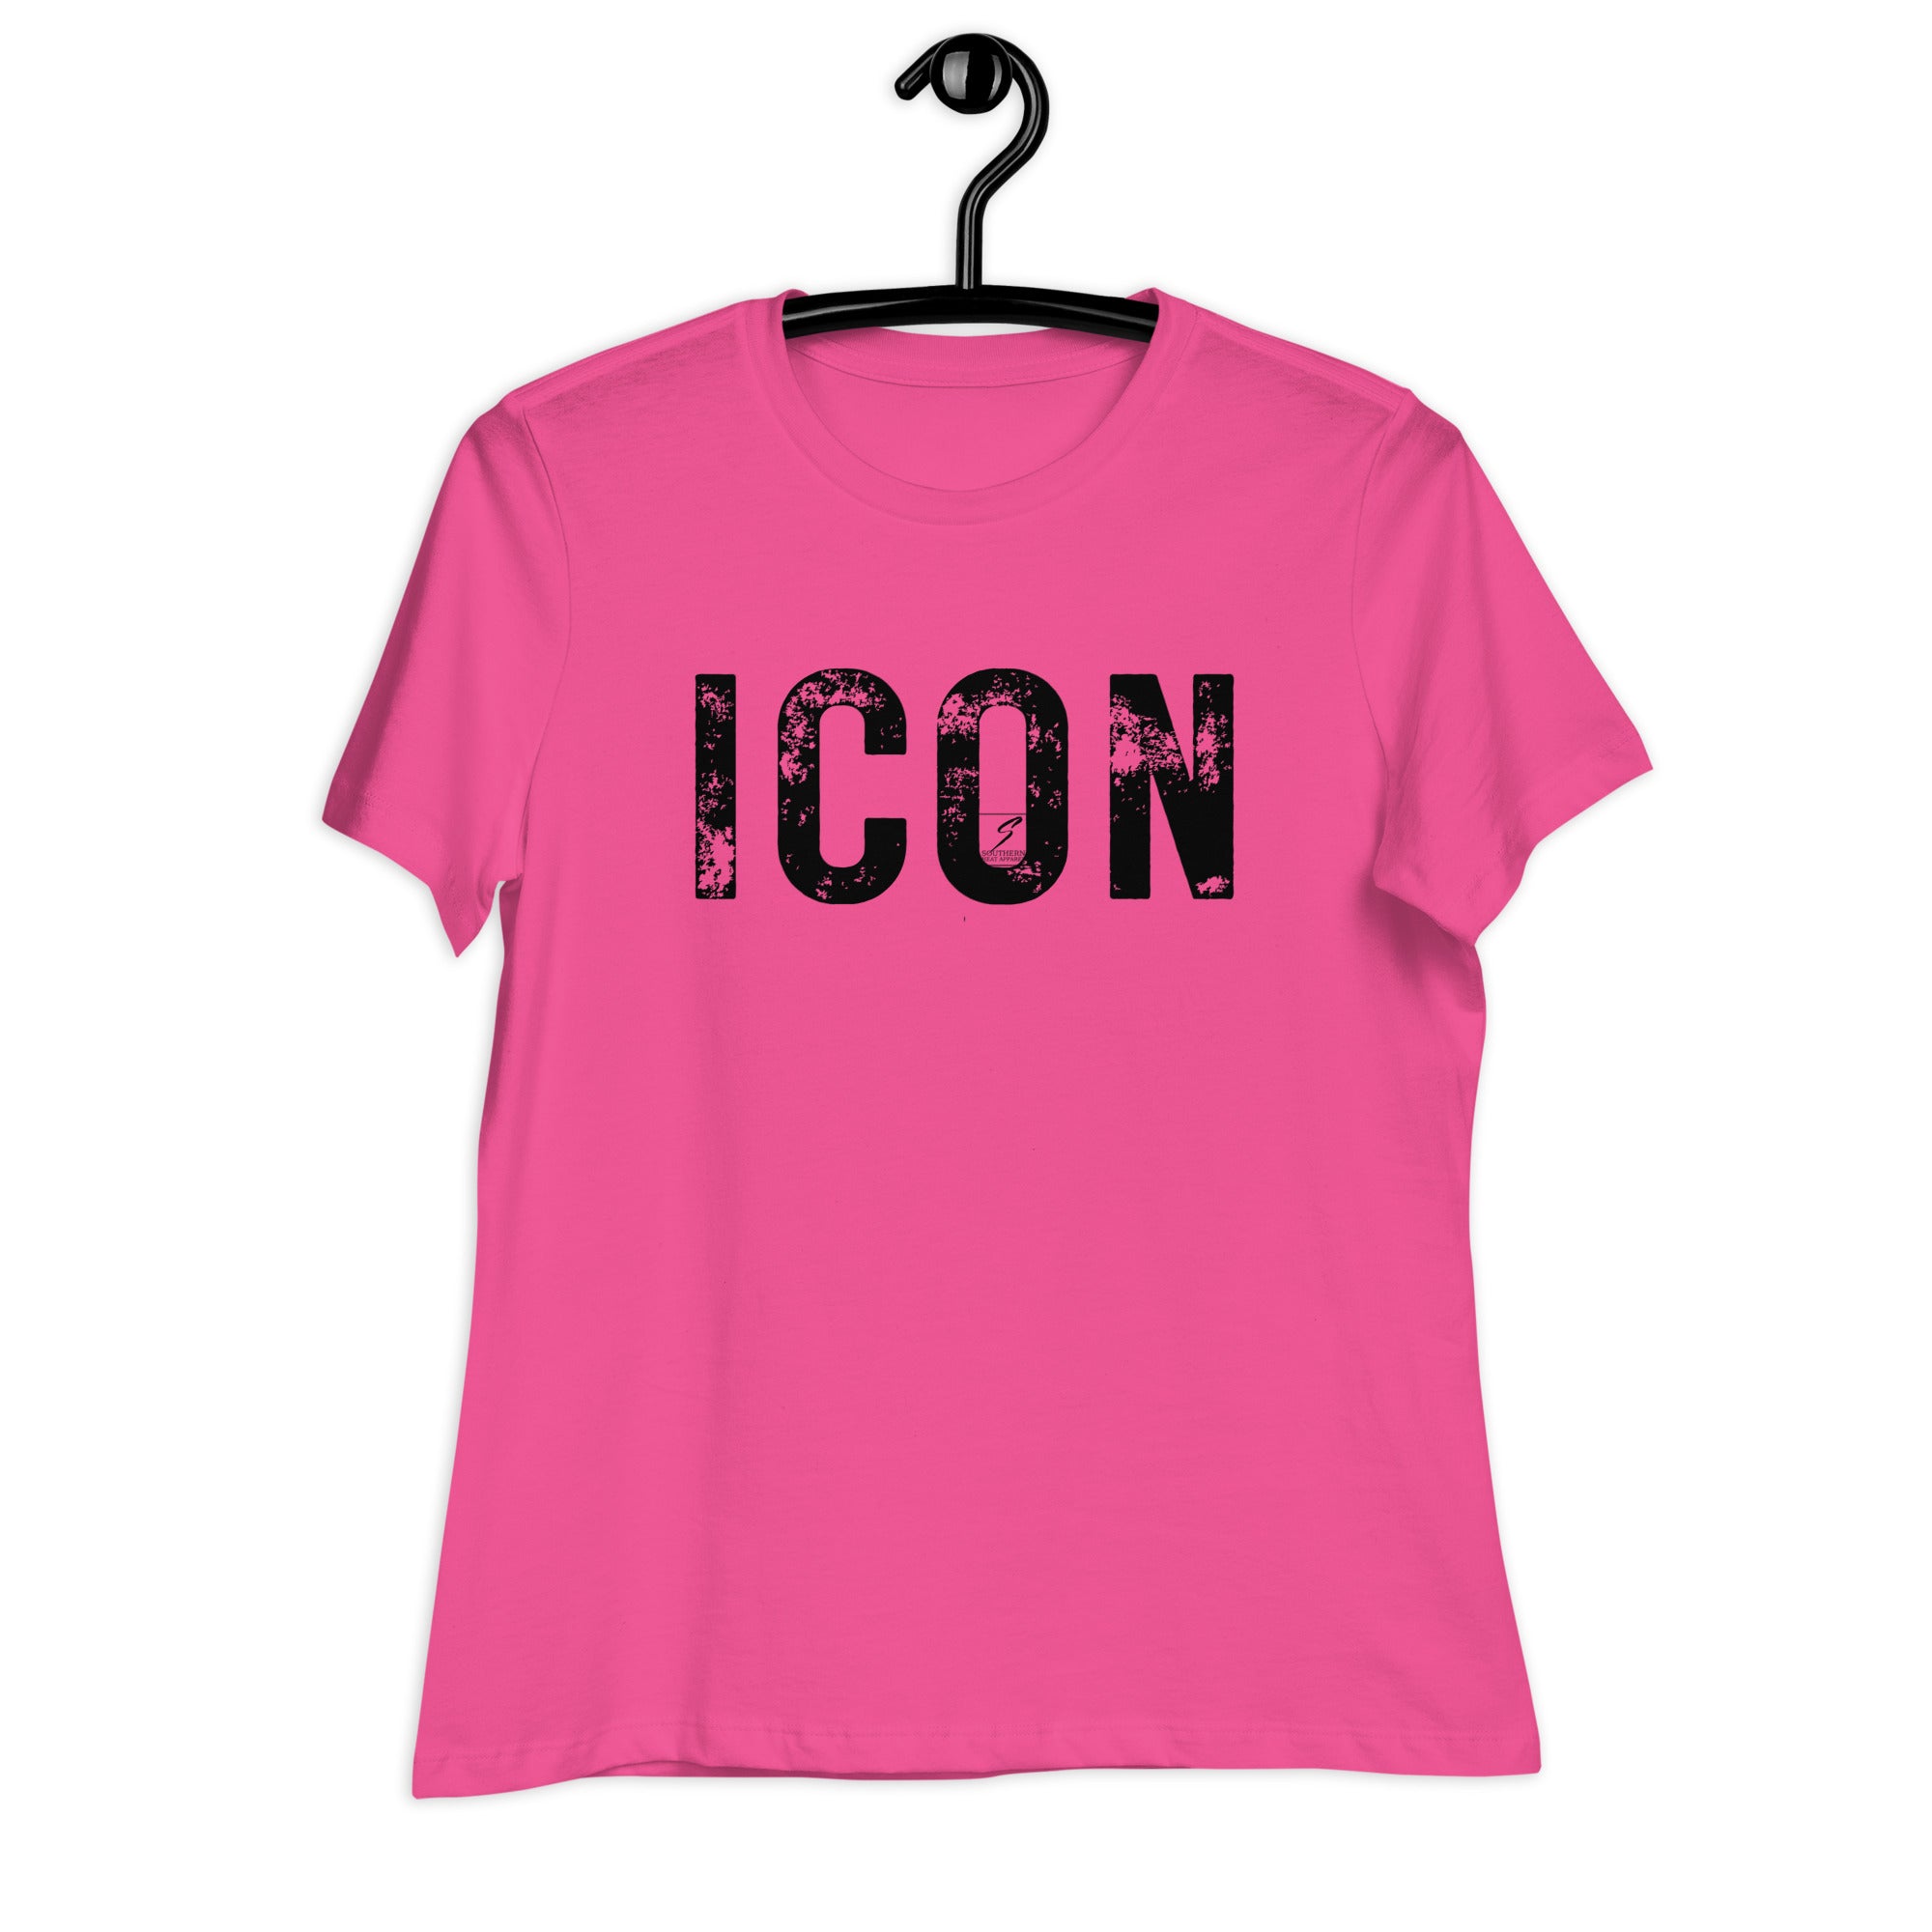 ICON-Women's Relaxed T-Shirt